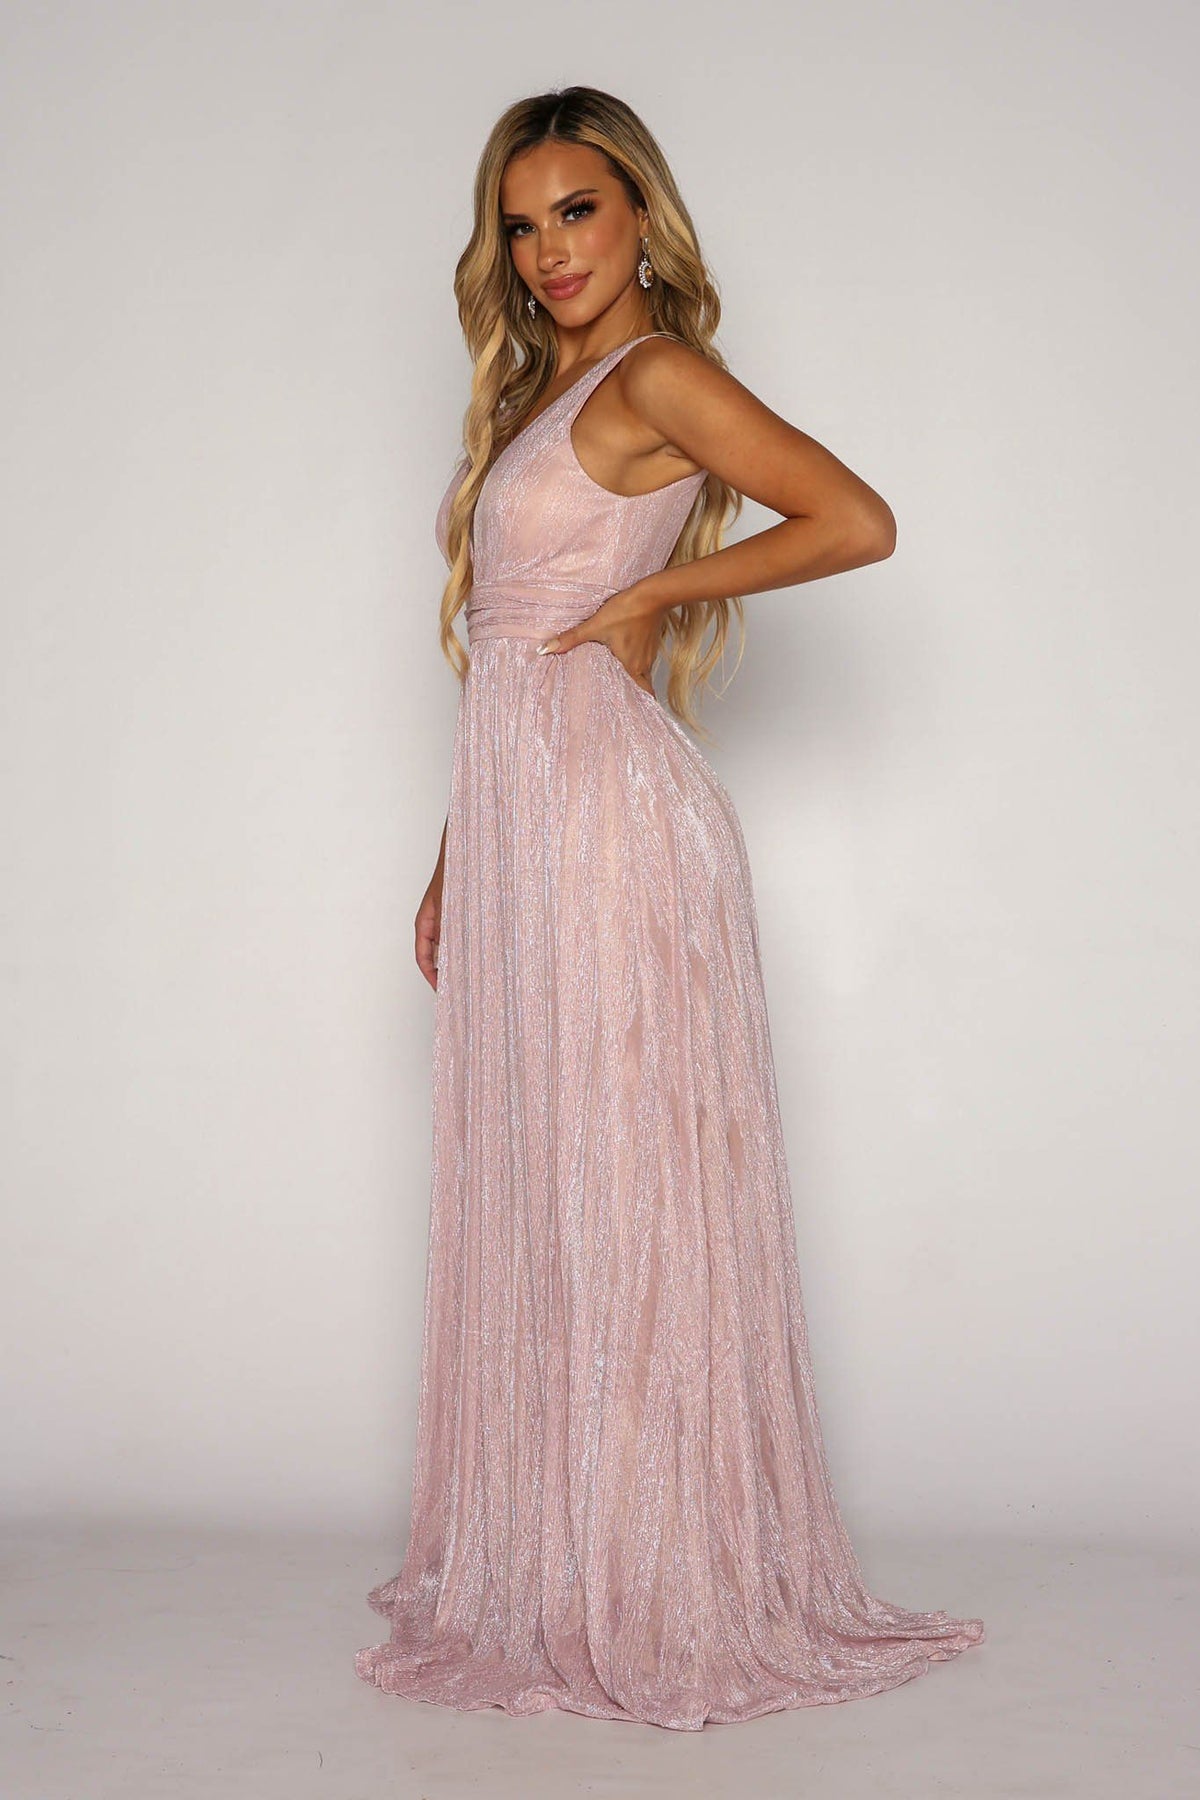 Side Image of Shimmer Pink Grecian Style Full Length A-Line Gown featuring Gathered Waistline, Draping Throughout the Skirt and V Neckline with Mesh Insert